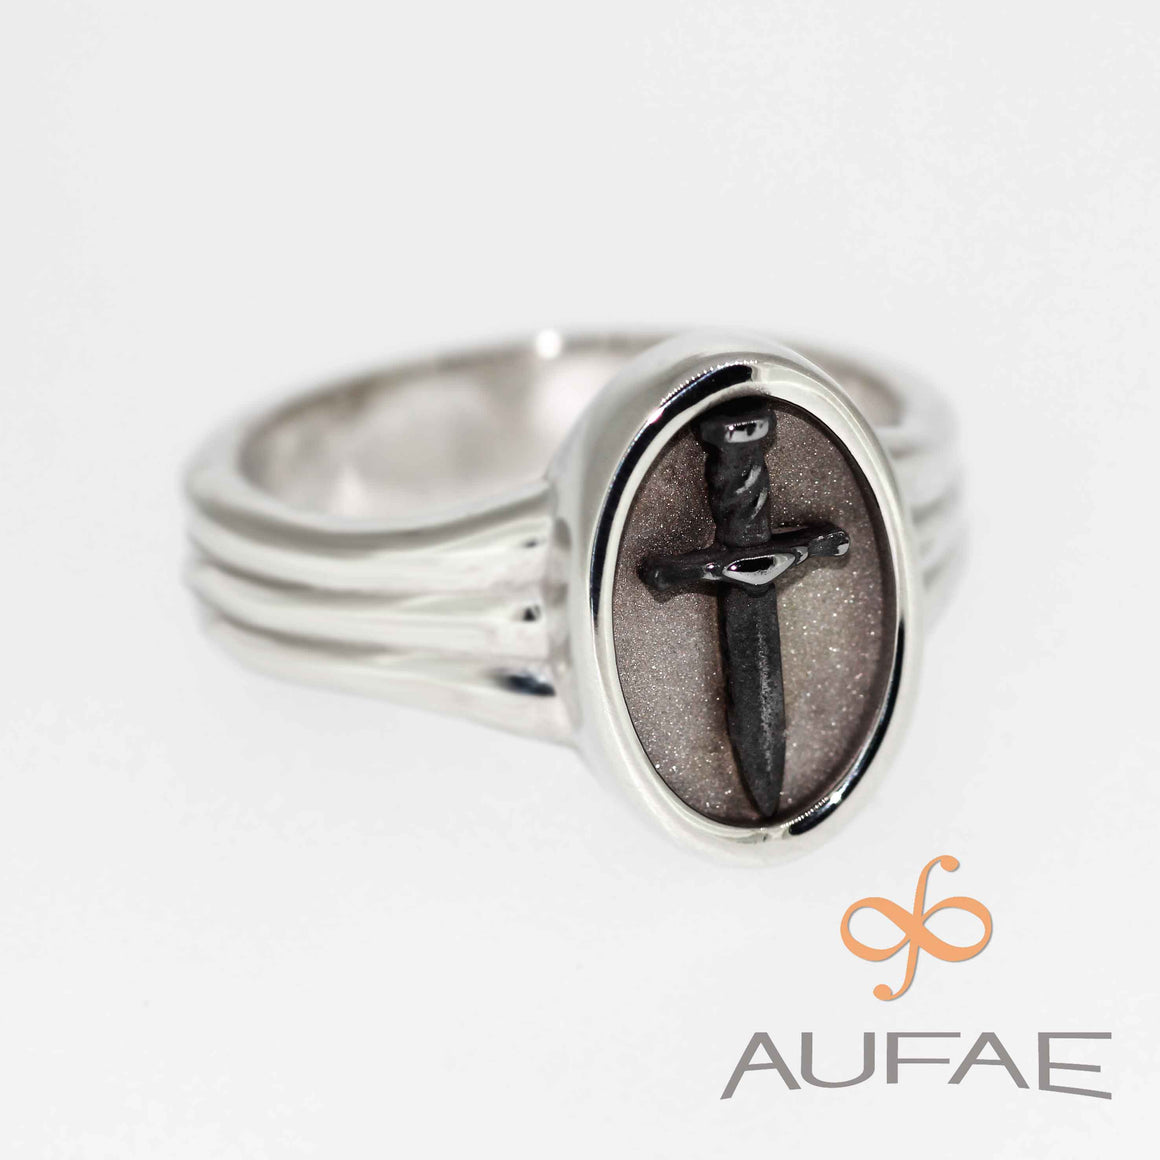 Aufae Dagger Ring:  A Solid sterling silver ring with an IRON dagger permanently bound to a field of textured sterling silver.  For protection against fairies and spirits